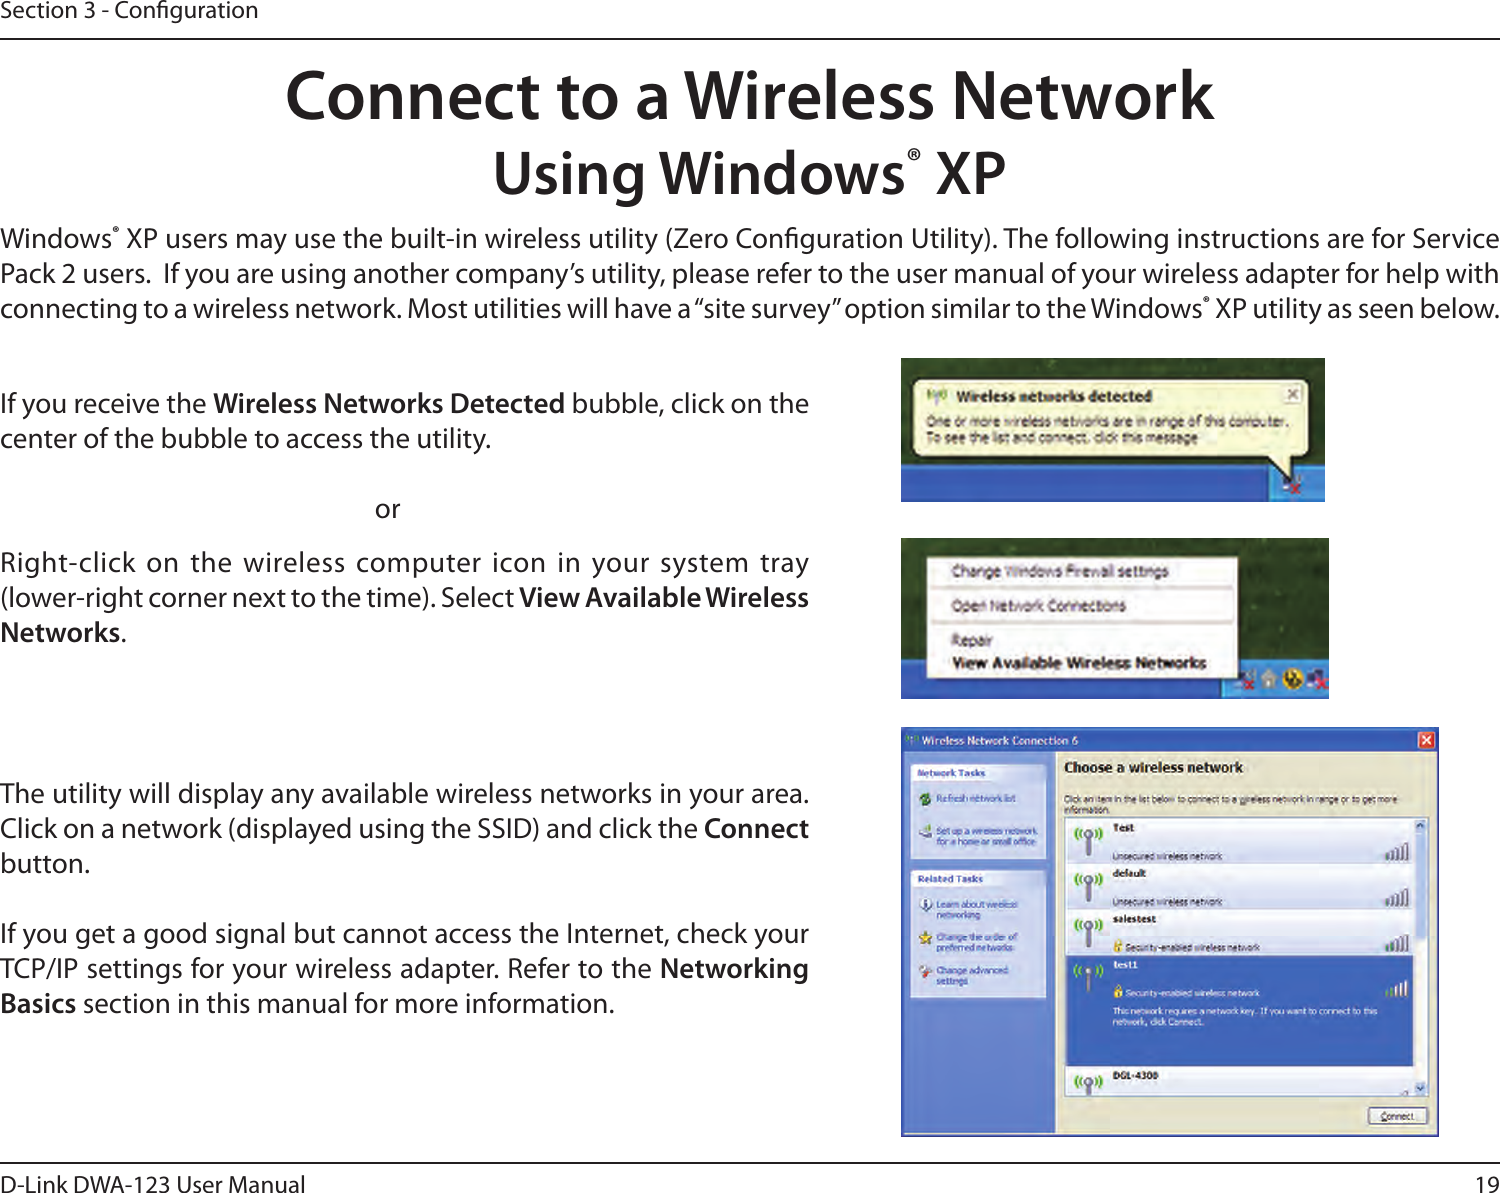 19D-Link DWA-123 User ManualSection 3 - CongurationConnect to a Wireless NetworkUsing Windows® XPWindows® XP users may use the built-in wireless utility (Zero Conguration Utility). The following instructions are for Service Pack 2 users.  If you are using another company’s utility, please refer to the user manual of your wireless adapter for help with connecting to a wireless network. Most utilities will have a “site survey” option similar to the Windows® XP utility as seen below.Right-click on the wireless computer icon in  your system tray (lower-right corner next to the time). Select View Available Wireless Networks.If you receive the Wireless Networks Detected bubble, click on the center of the bubble to access the utility.     orThe utility will display any available wireless networks in your area. Click on a network (displayed using the SSID) and click the Connect button.If you get a good signal but cannot access the Internet, check your TCP/IP settings for your wireless adapter. Refer to the Networking Basics section in this manual for more information.